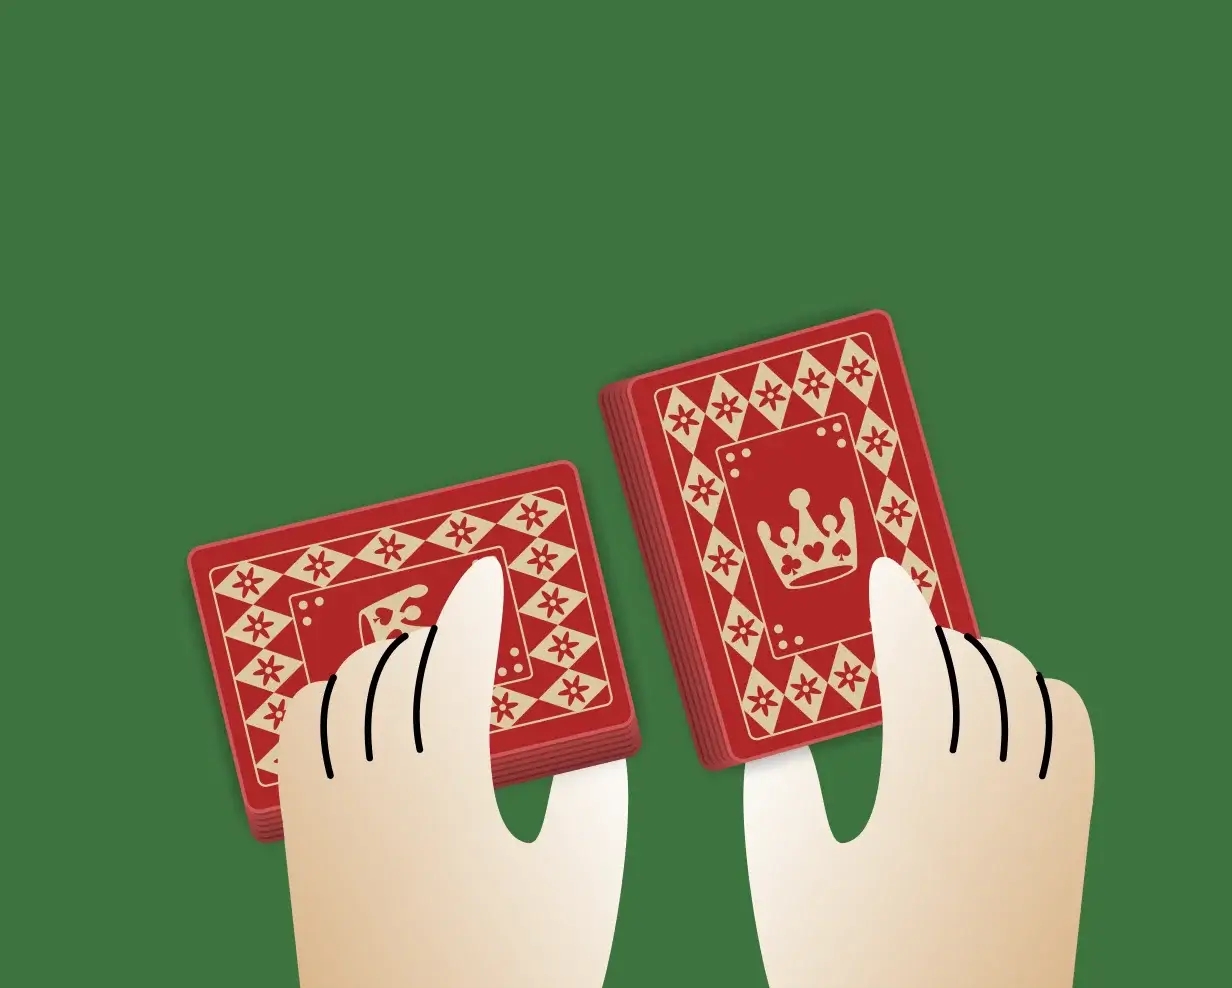 Spider Solitaire uses two decks of cards